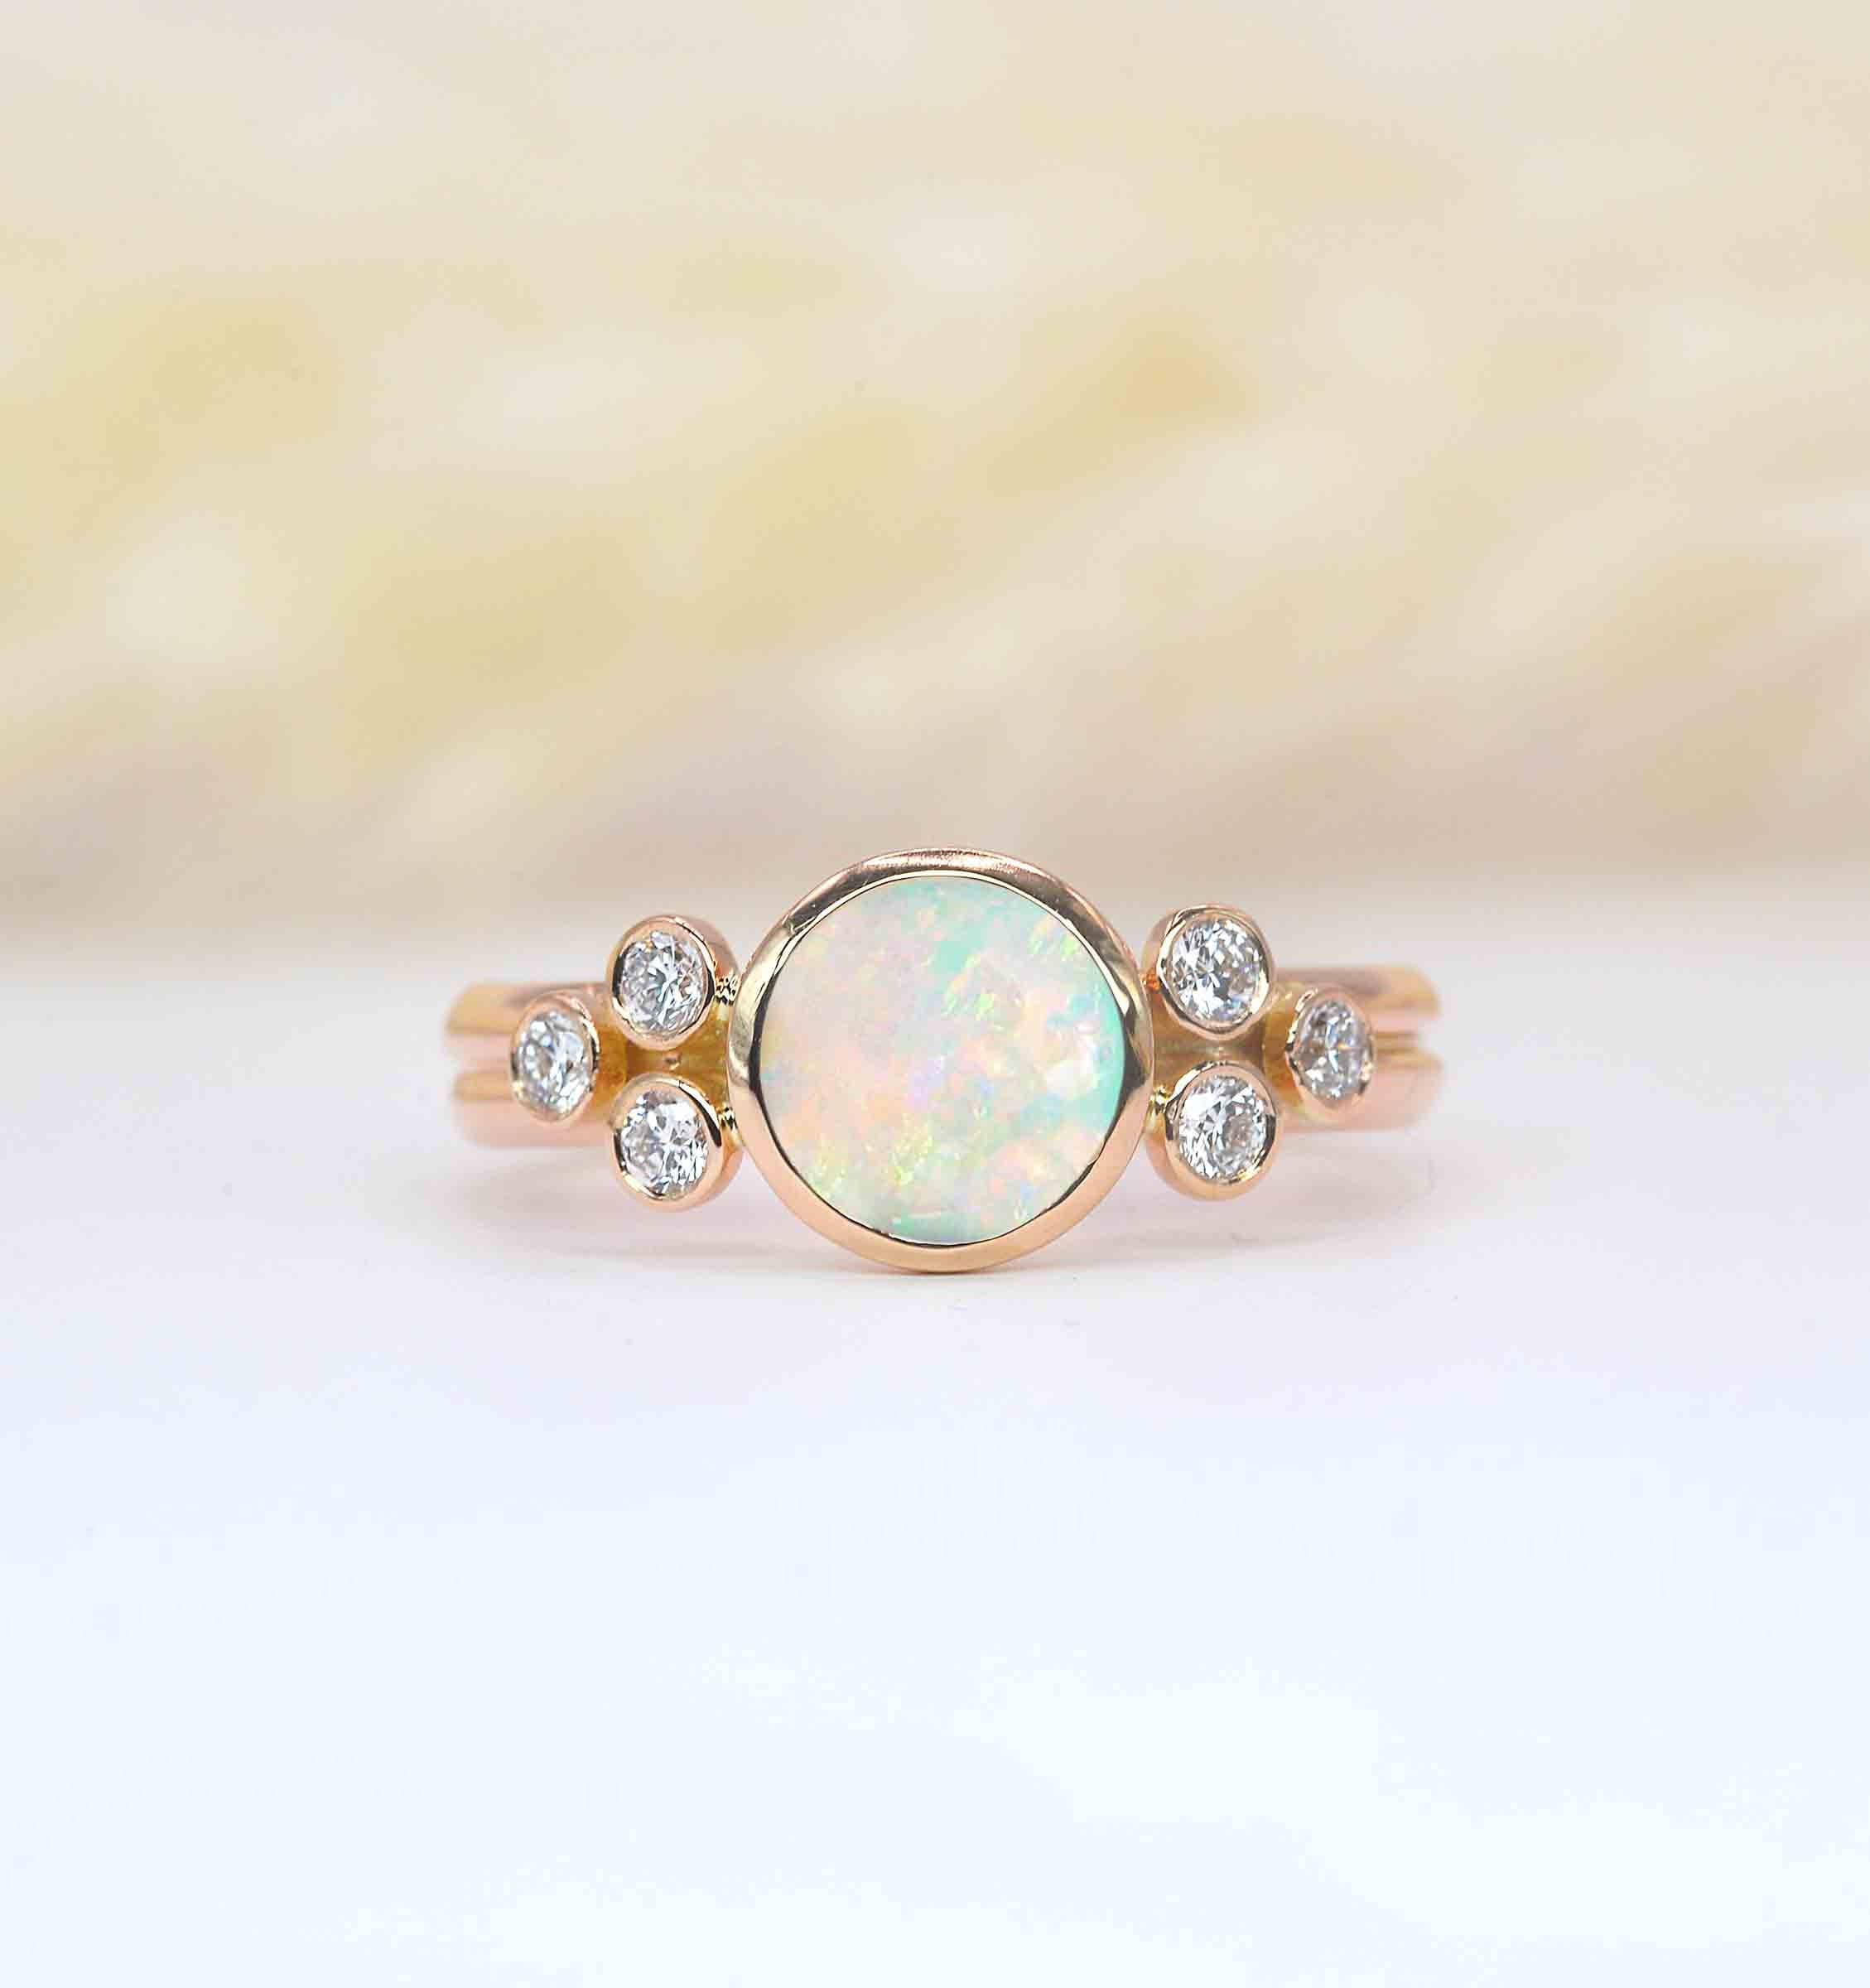 White Opal & Diamond Featuring Cluster Ring | Opal Art Deco Vintage Anniversary, Engagement, Birthday Gift